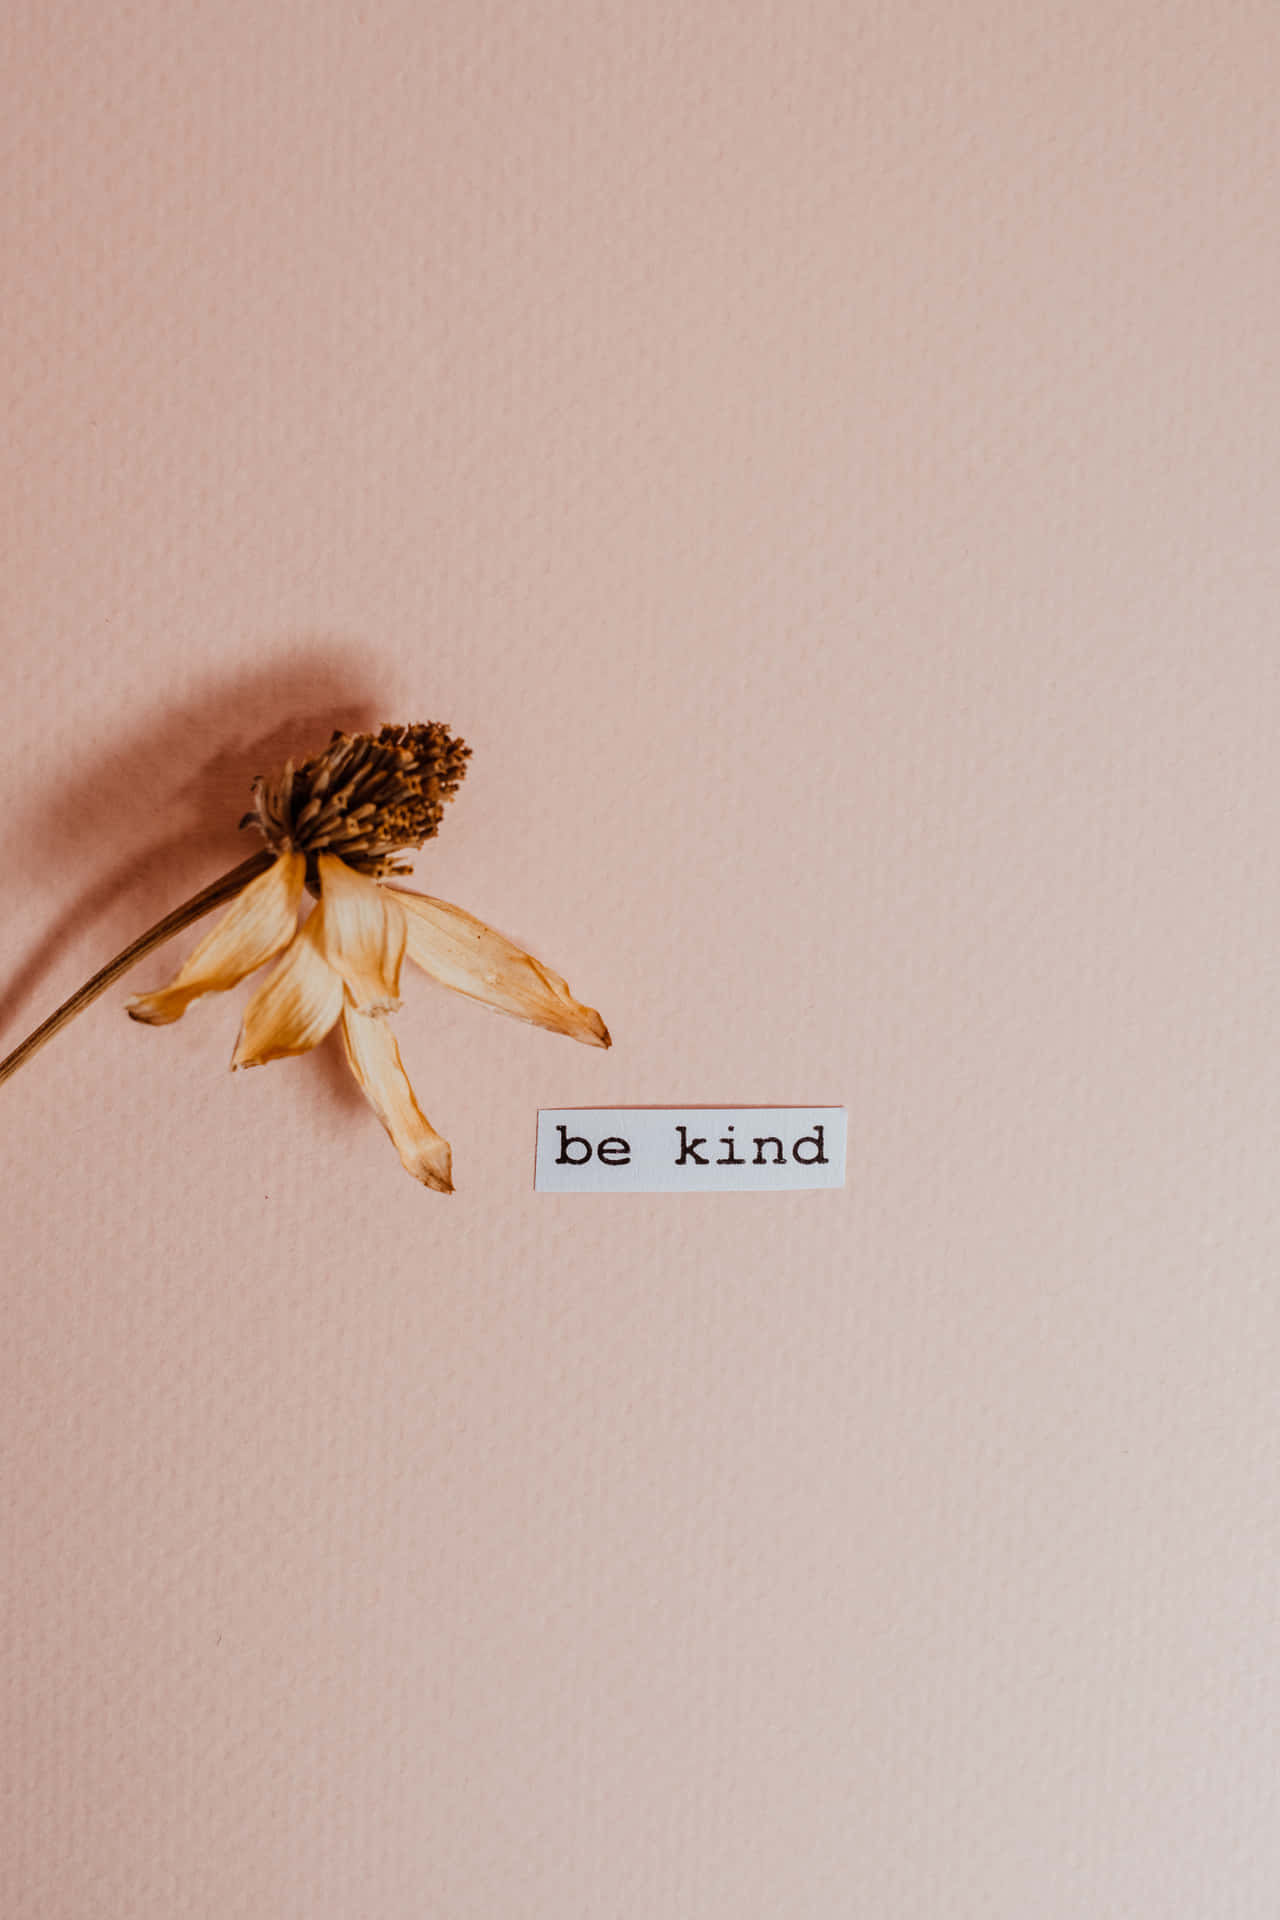 Be Kind Sticker And Dried Flower Wallpaper